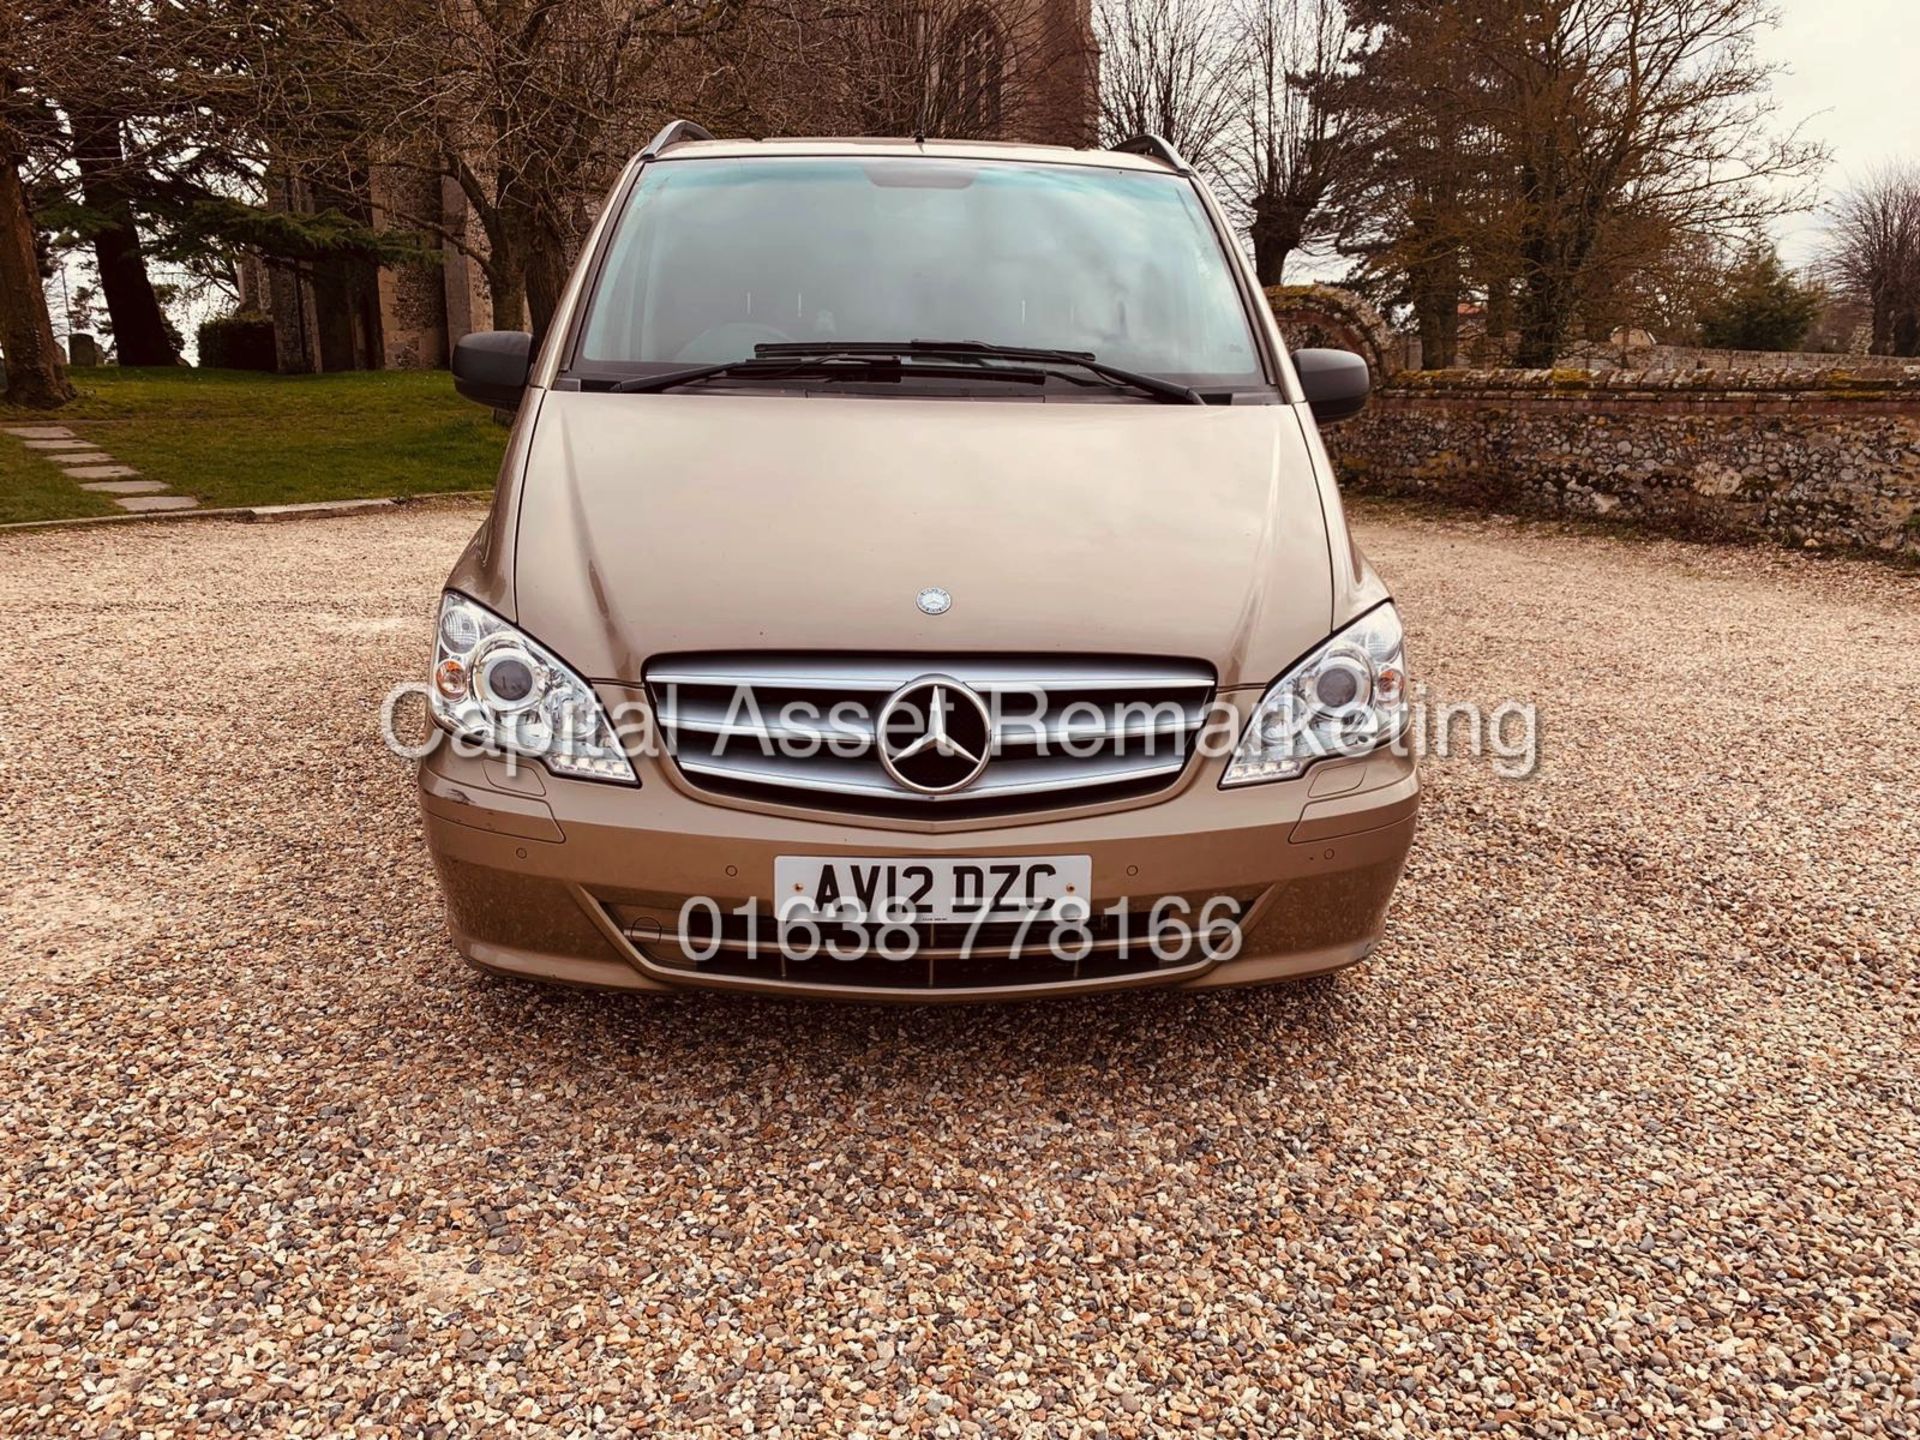 MERCEDES VITO 122CDI *SPORT-X SPEC* 8 SEATER DUALINER LWB (12 REG) 1 OWNER FSH -AIR CON-ALL THE TOYS - Image 3 of 19